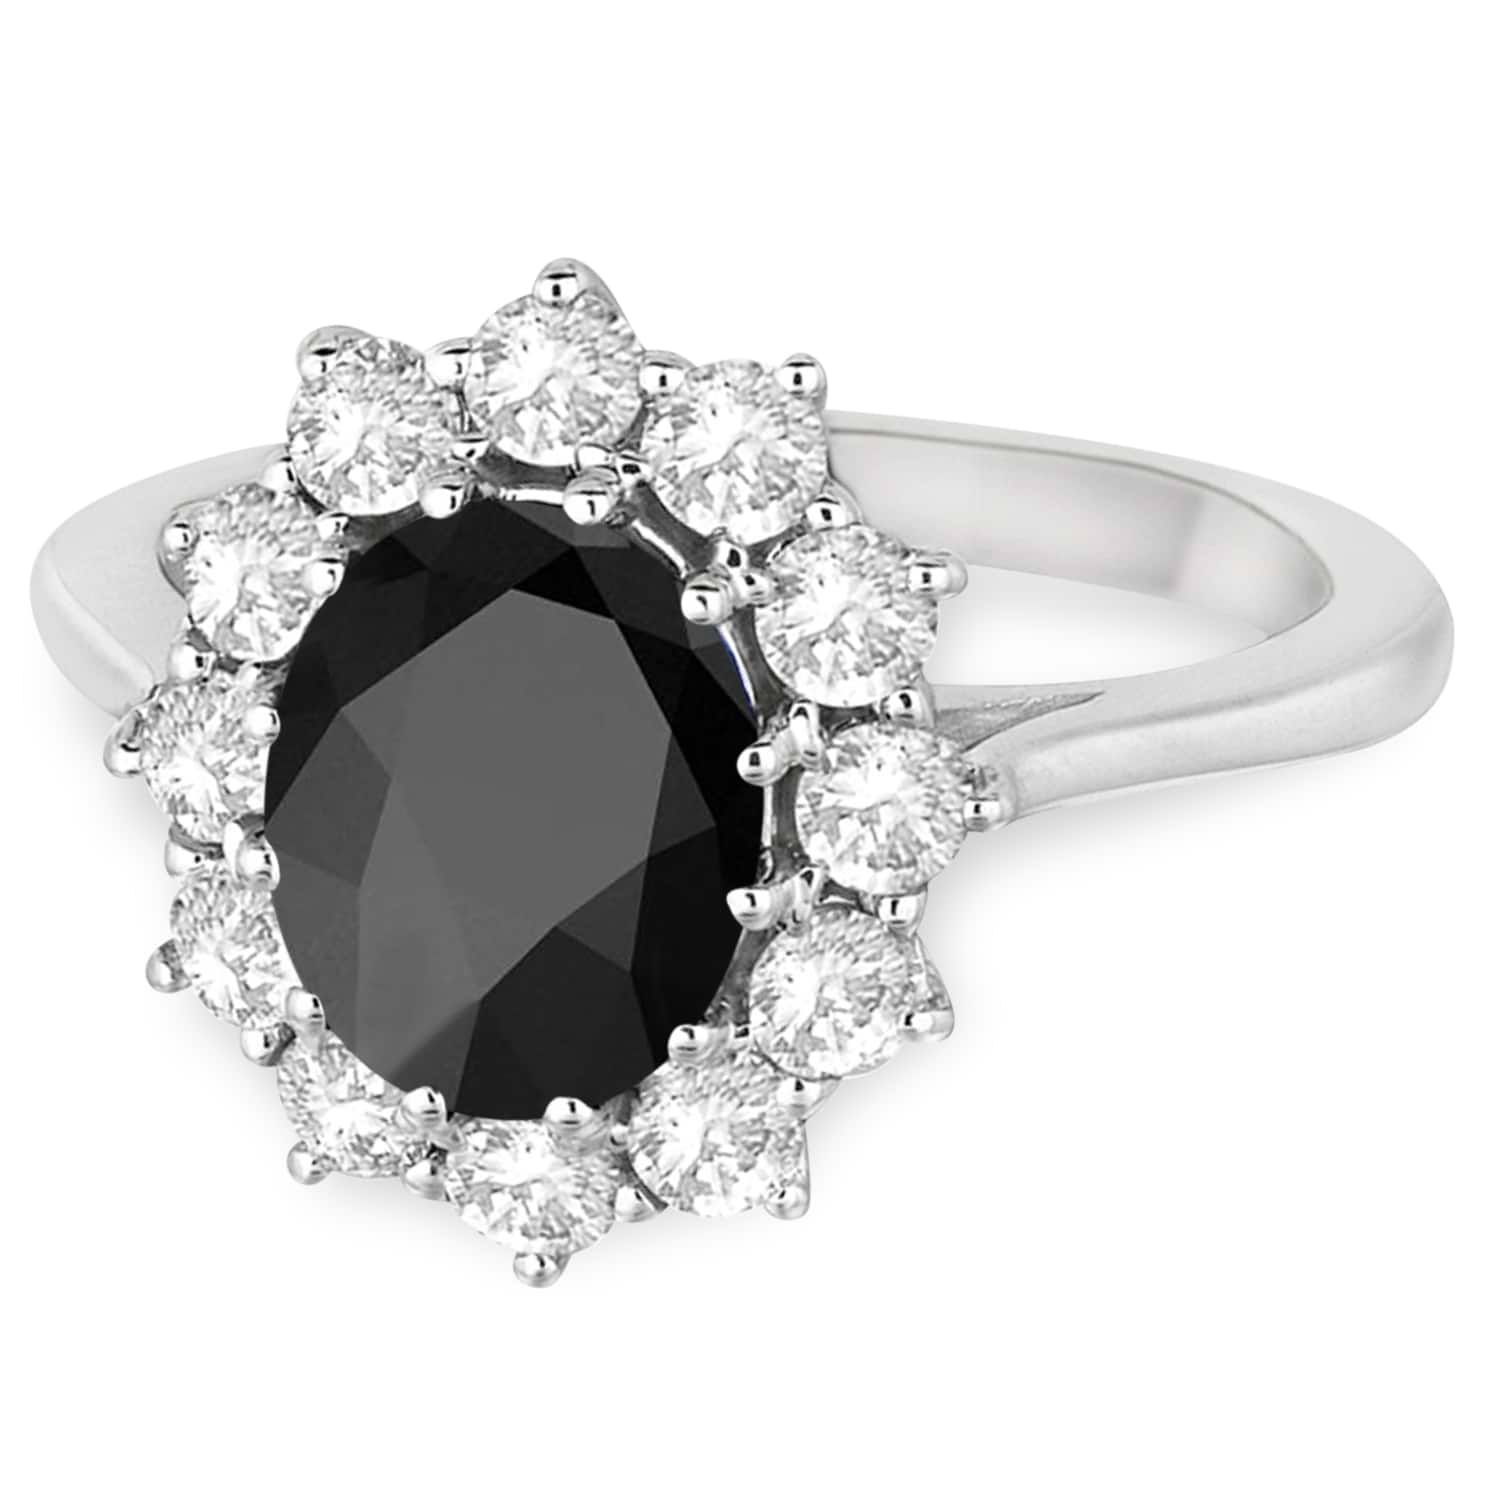 Oval Onyx and Diamond Ring 18k White Gold (3.60ctw)